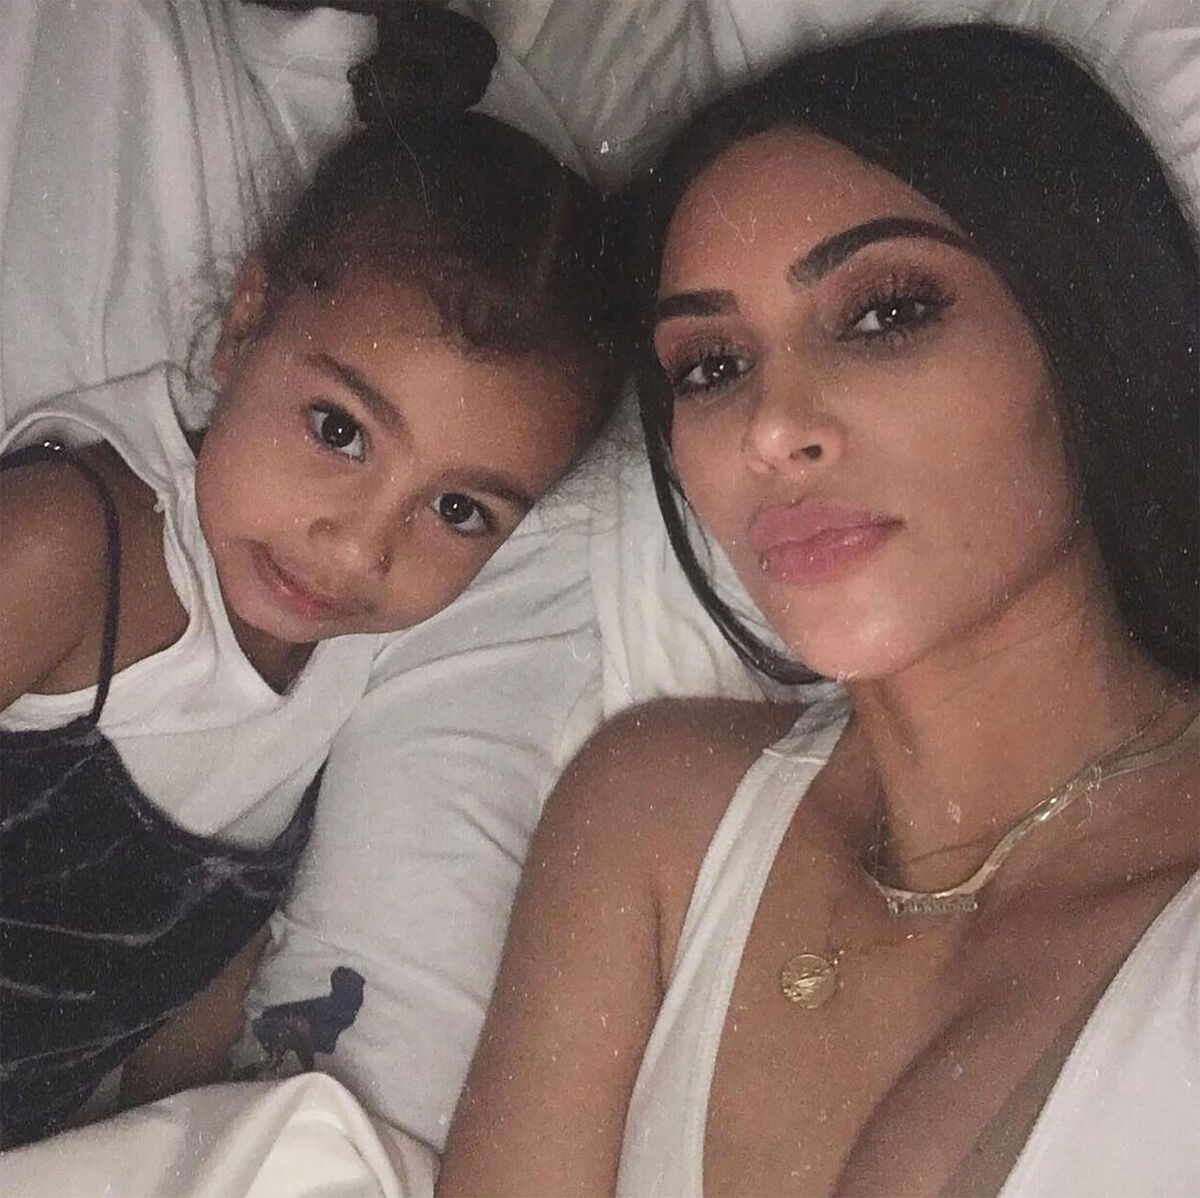 likhoa kim kardashian choked up when she first received a letter from her eldest daughter north west on kim s st birthday 6549f3d13ff9d Kim Kardashian Choked Up When She First Received A Letter From Her Eldest Daughter North West On Kim's 43st Birthday